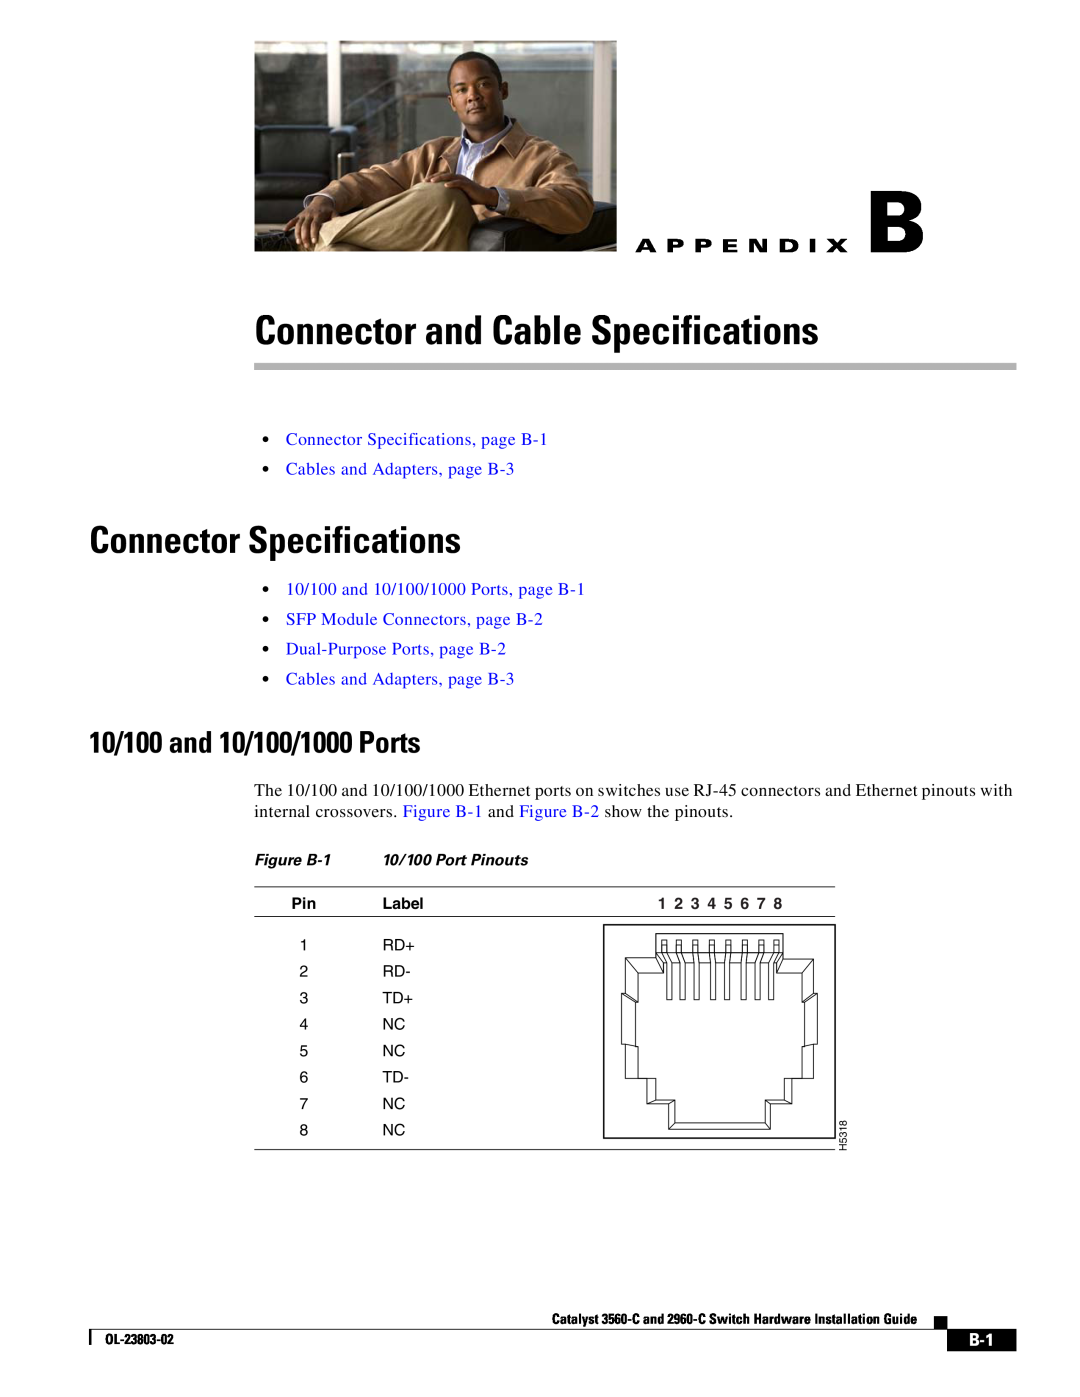 Cisco Systems 3560-C manual Connector and Cable Specifications, Connector Specifications, 10/100 and 10/100/1000 Ports 